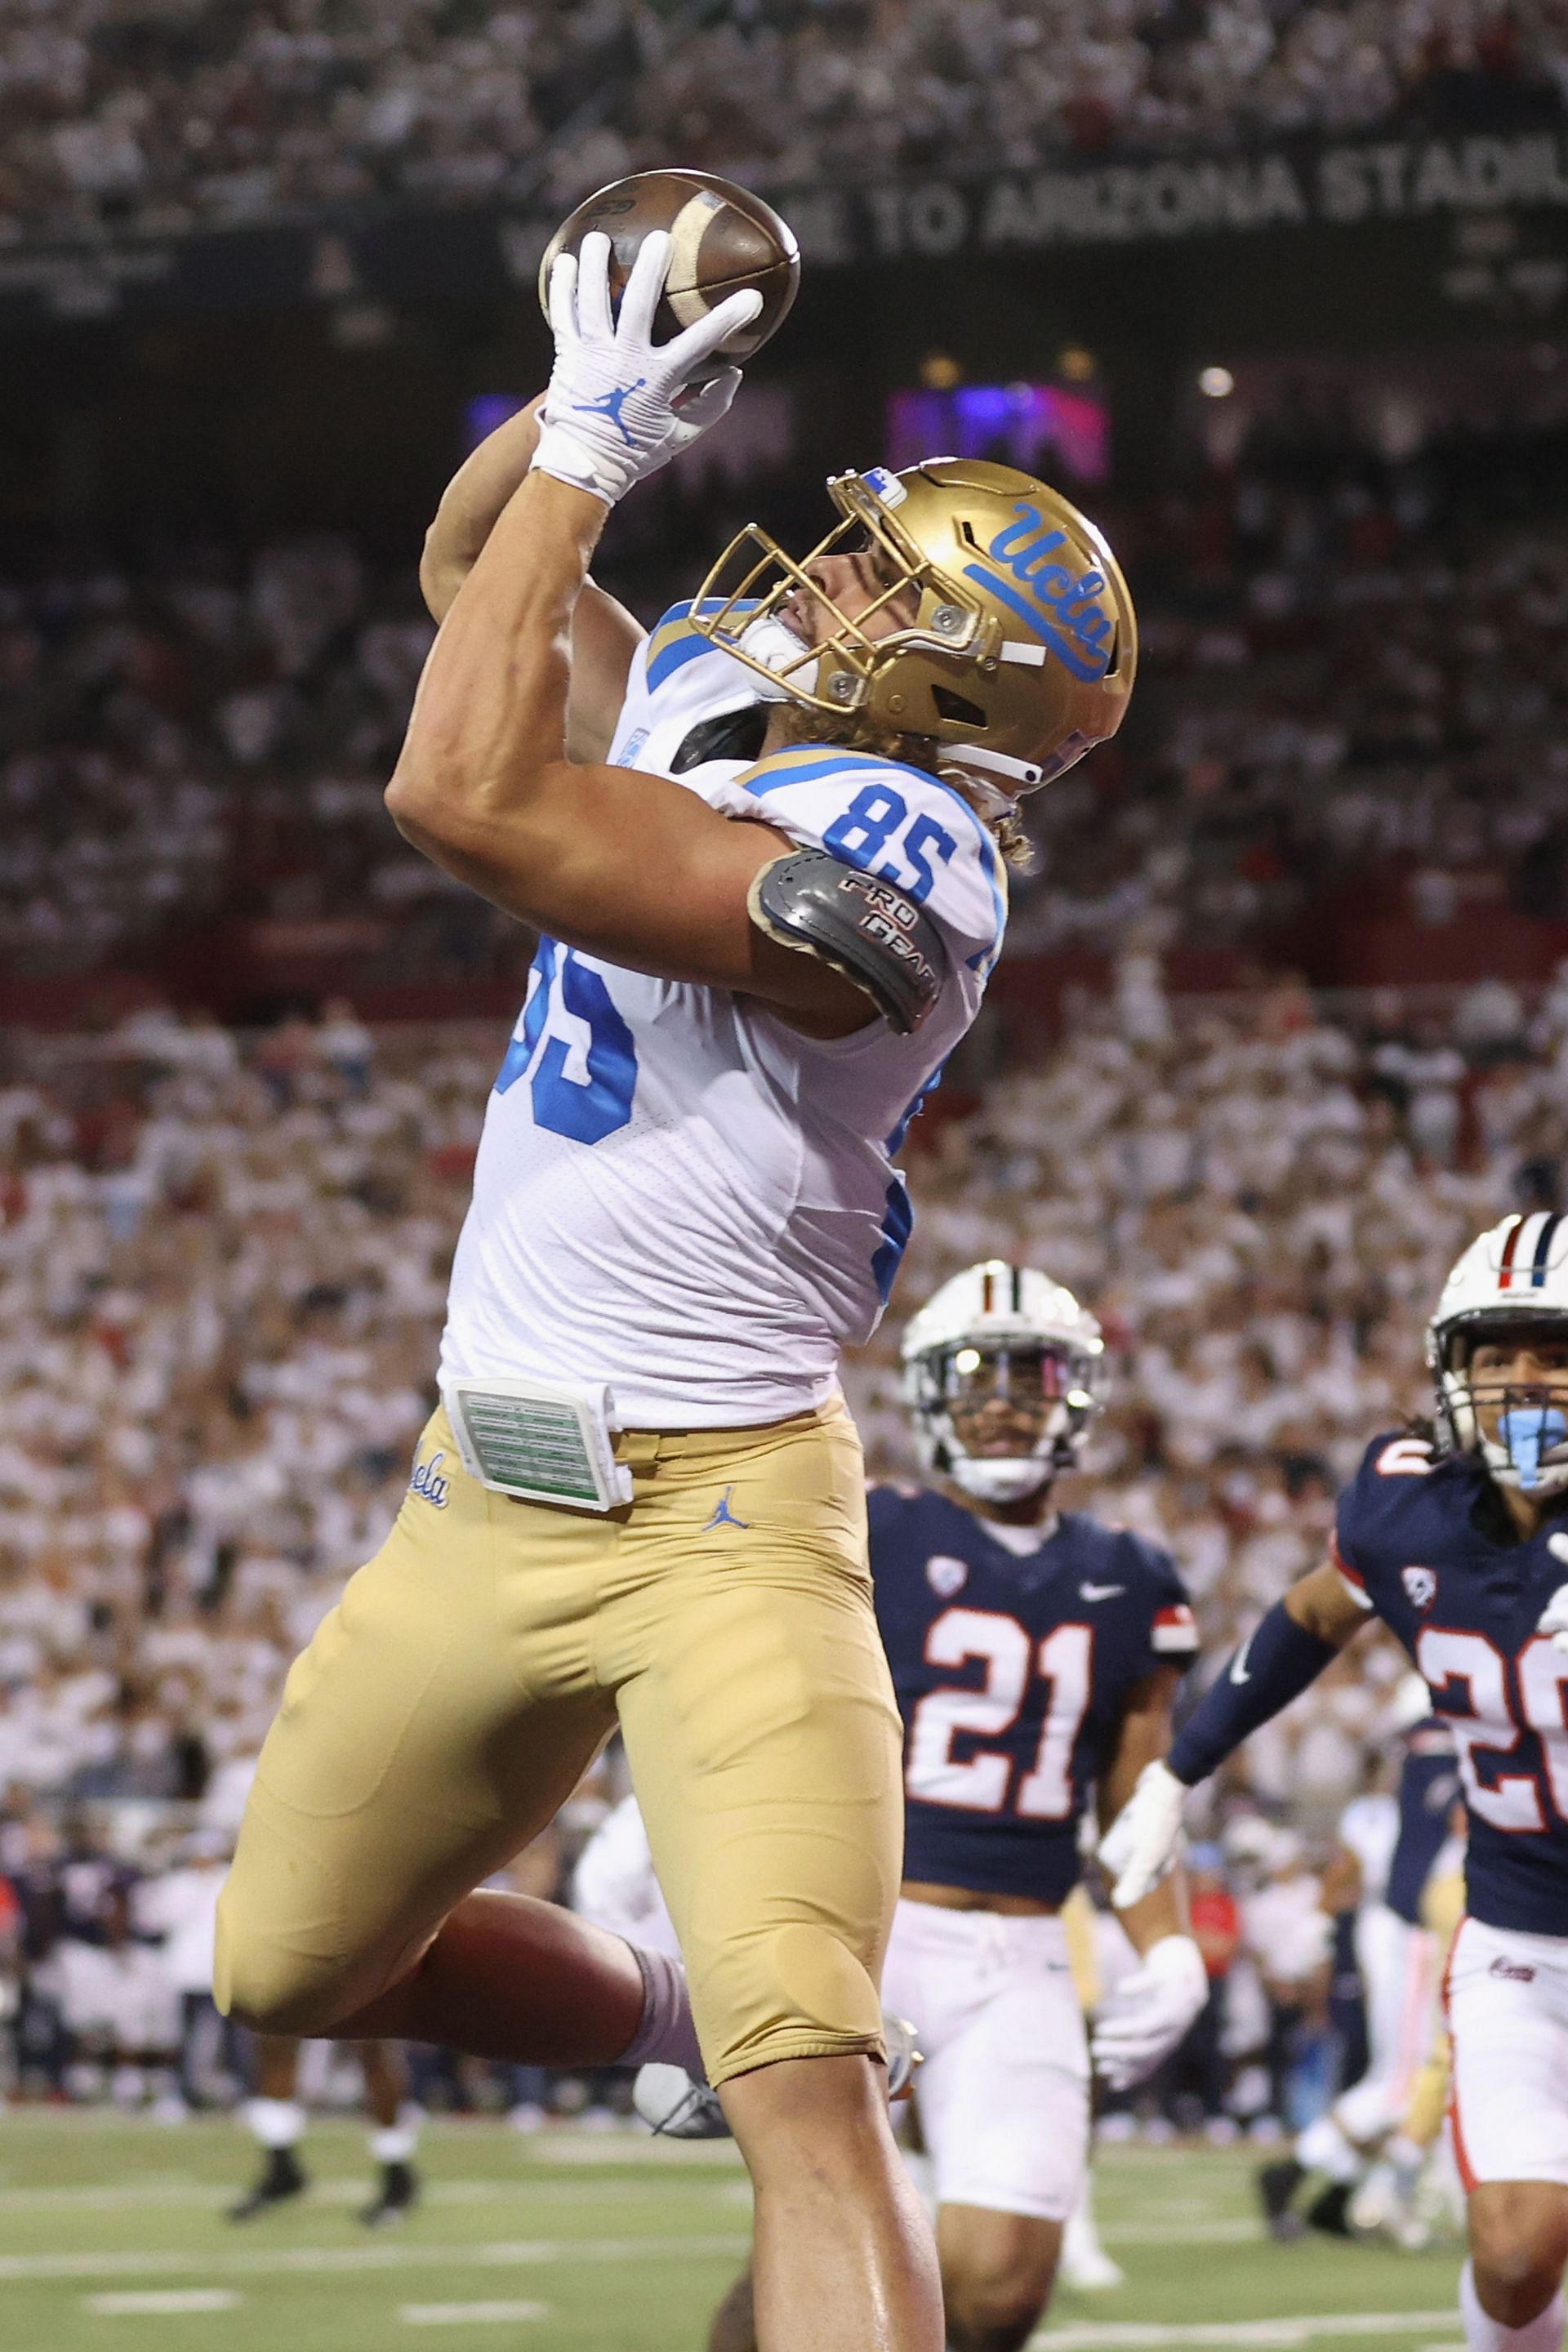 UCLA TE Greg Dulcich drafted by the Denver Broncos in the third round